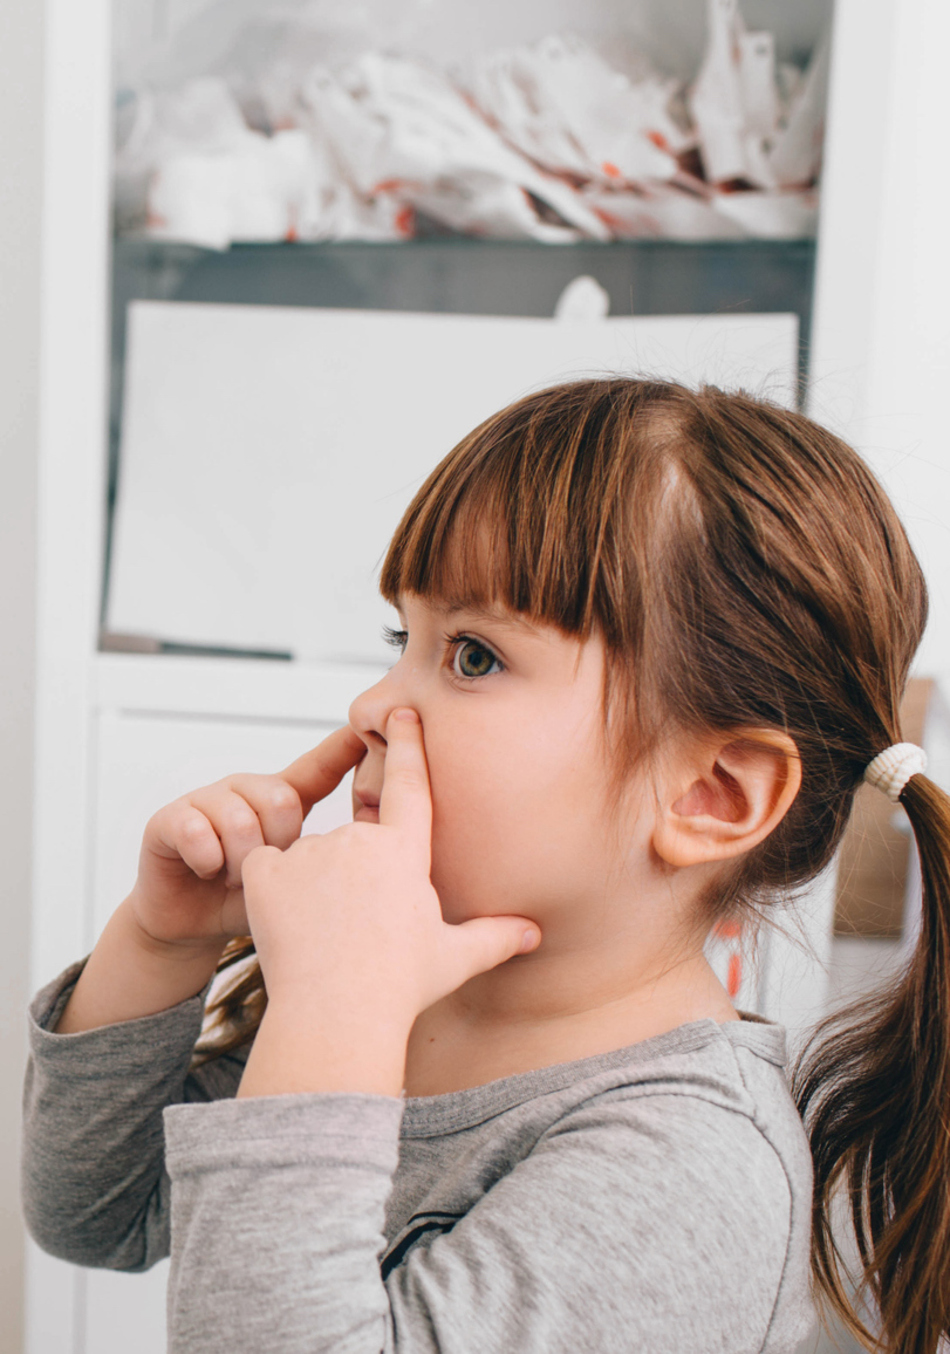 When Does My Child Need to Go to the ER for a Nose Injury?